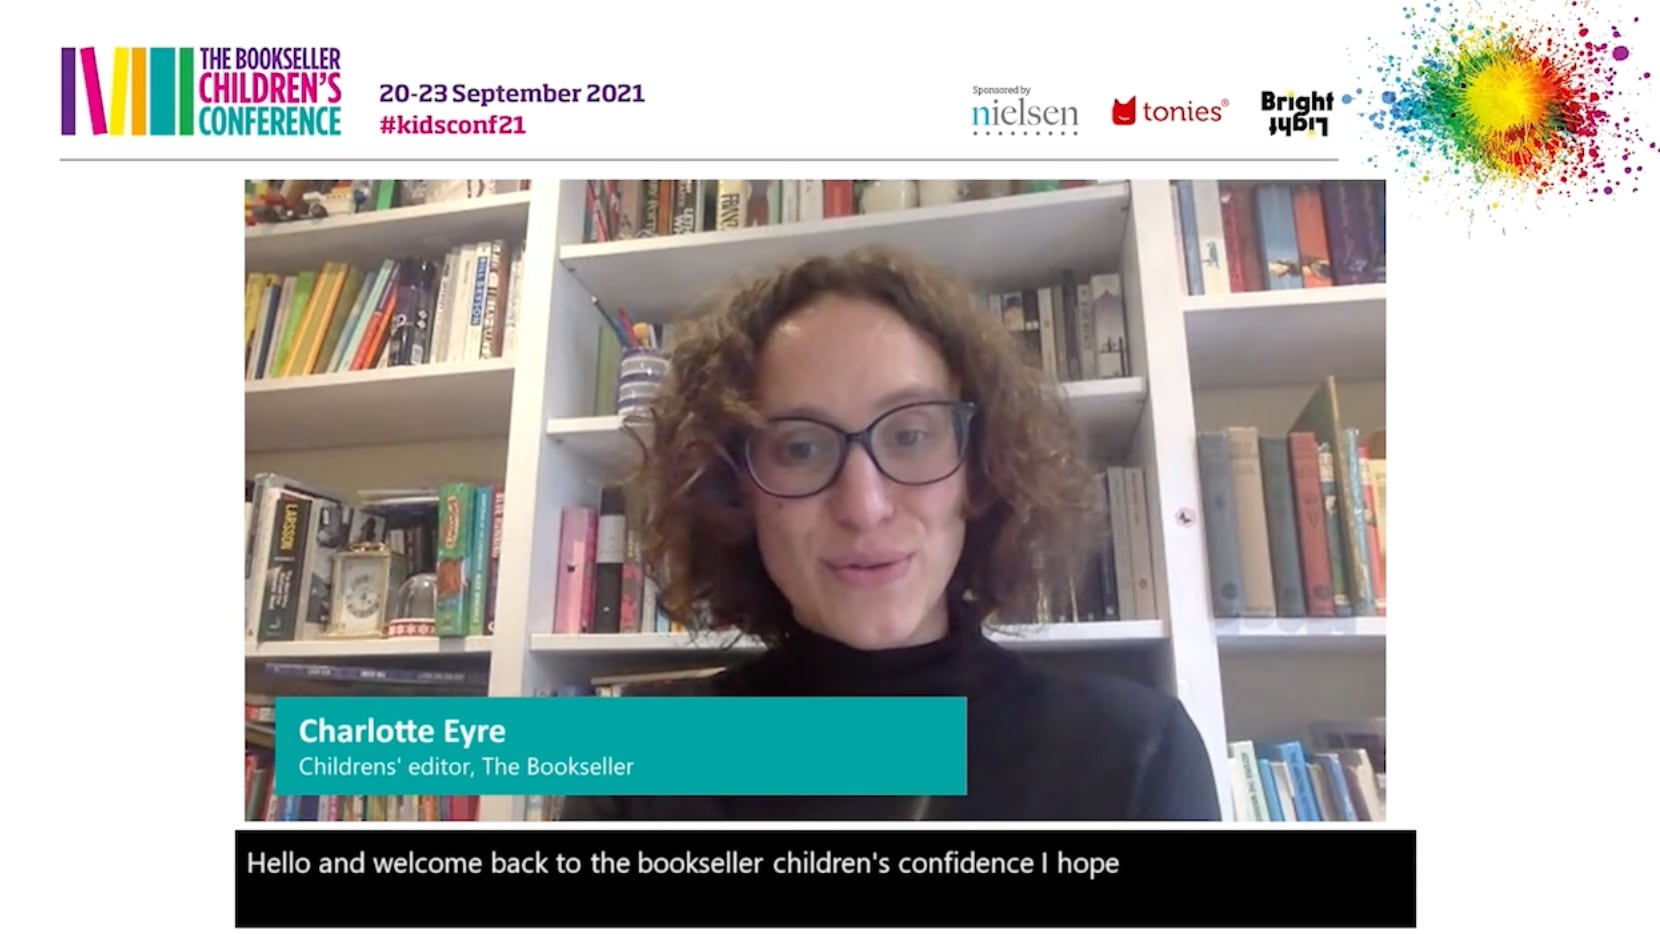 Monday Afternoon Webinars | The Bookseller Children's Conference 2021